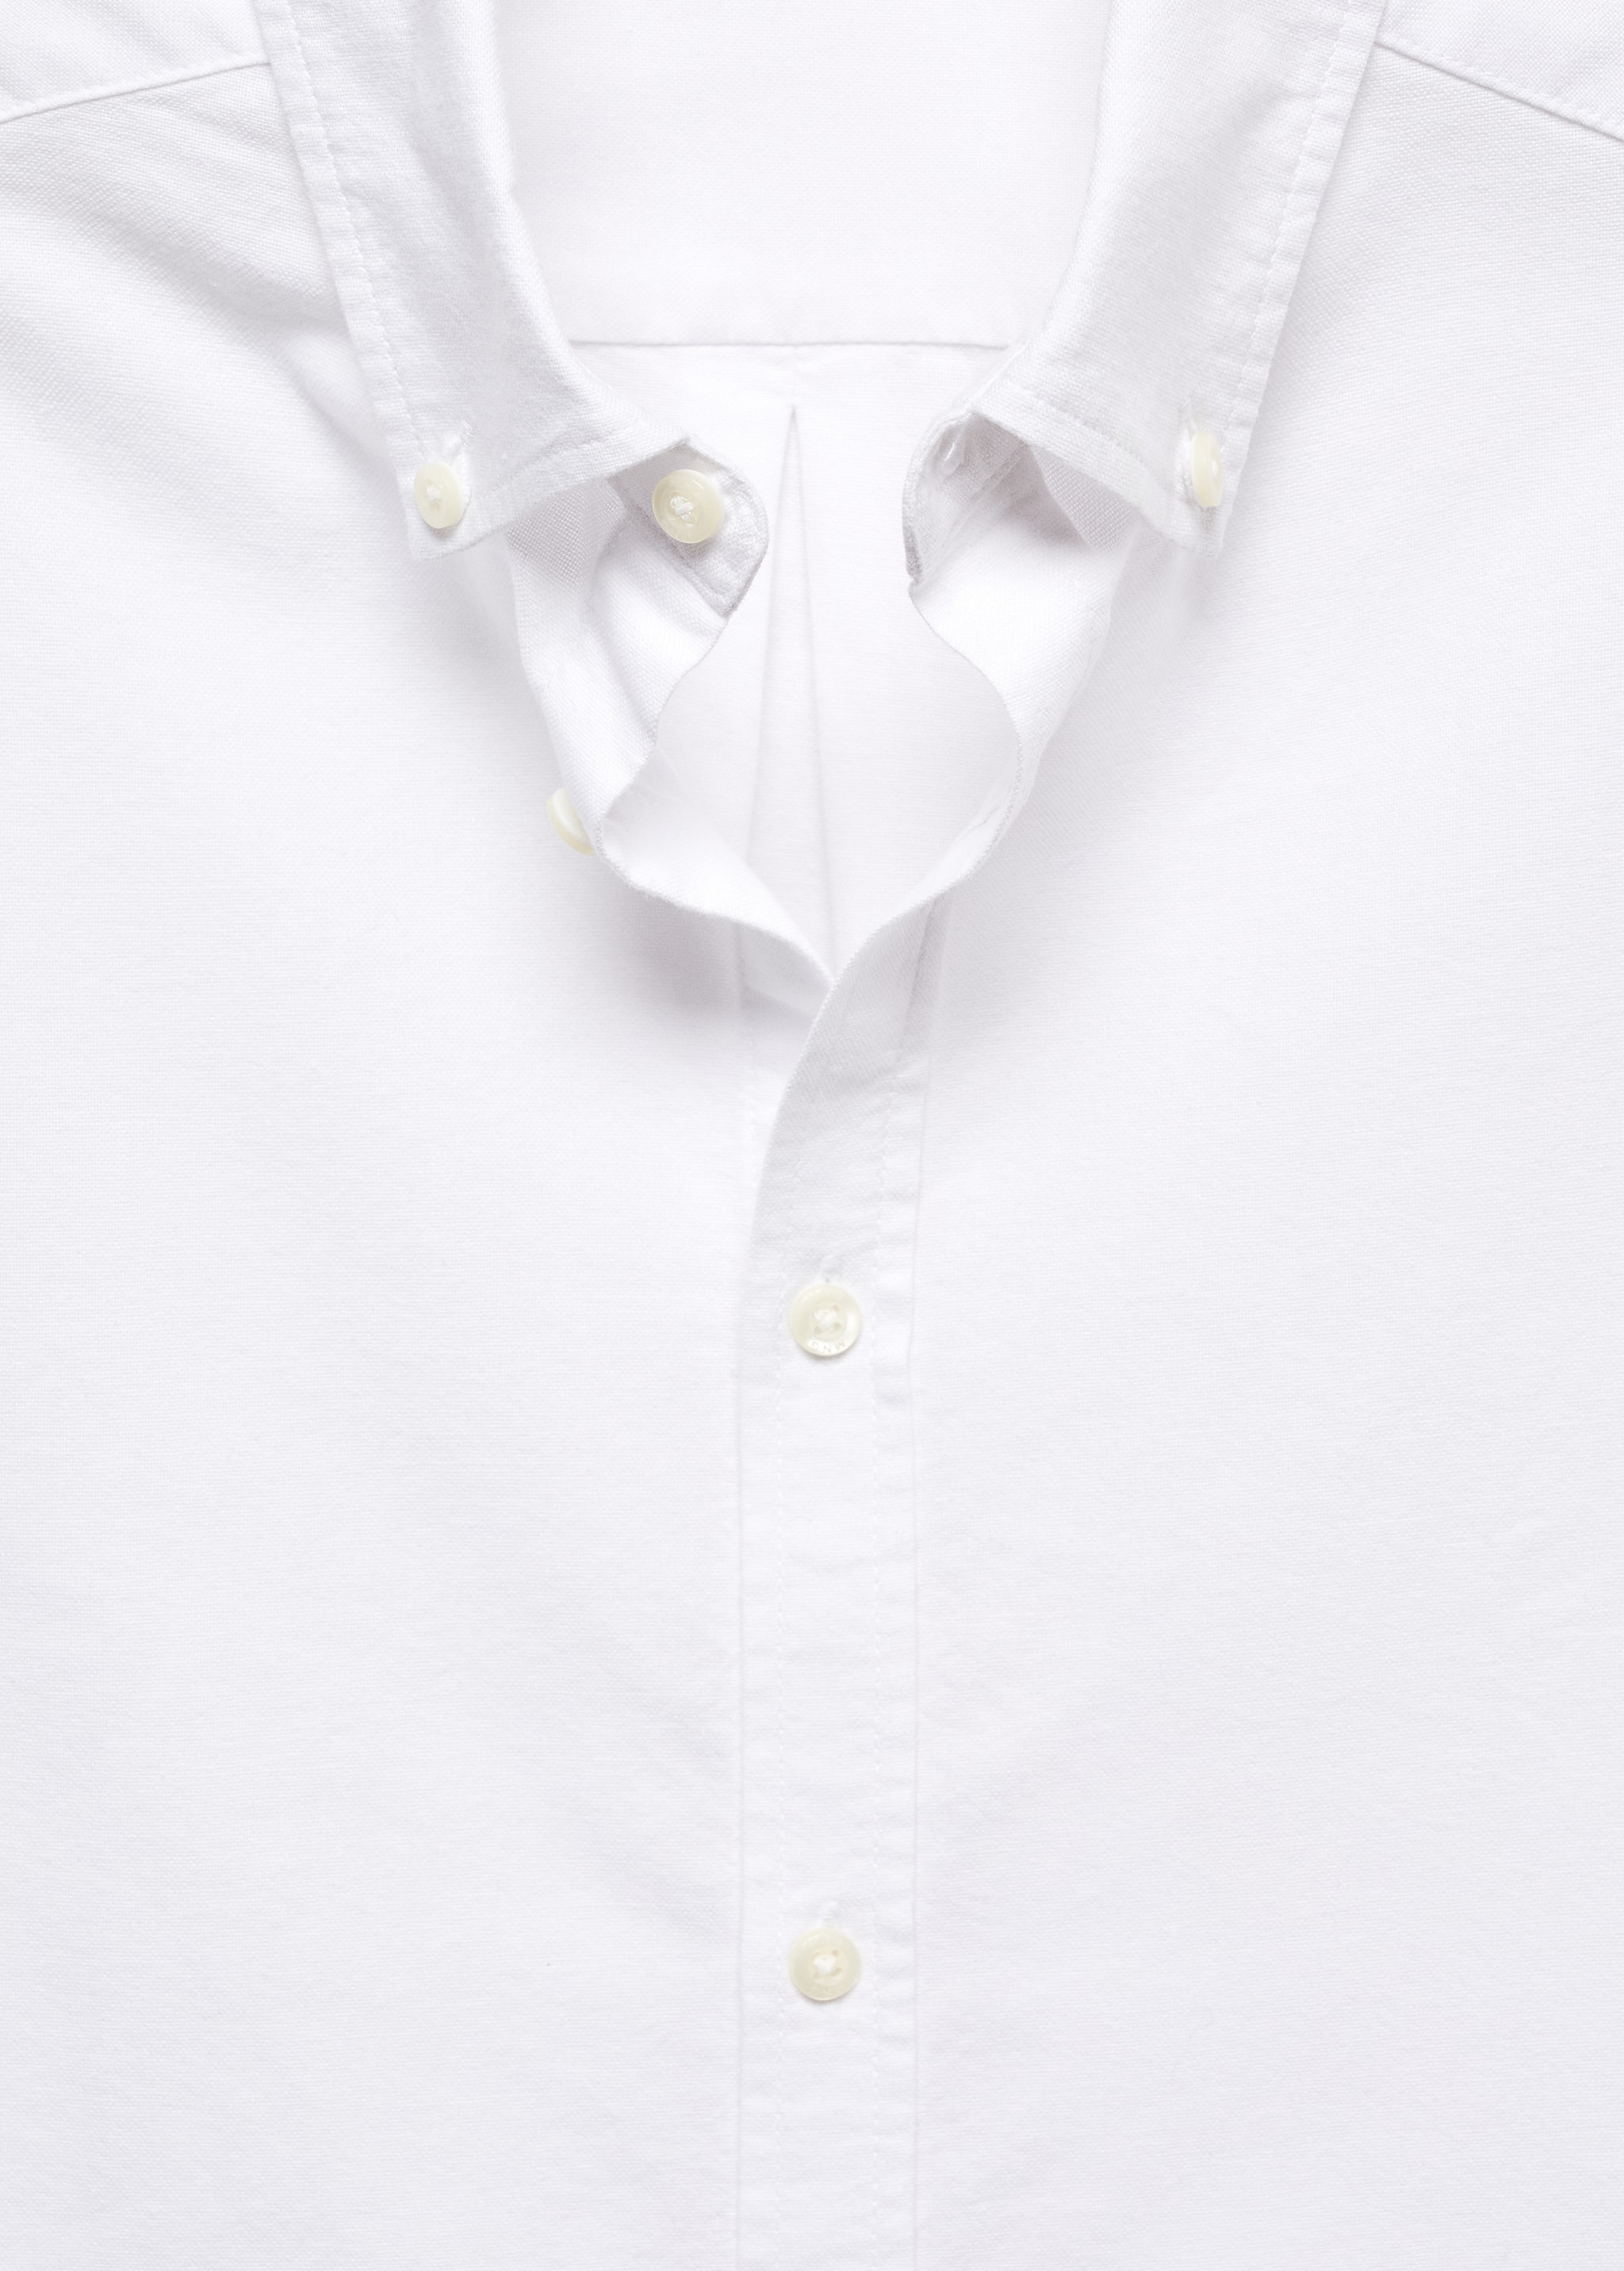 Unisex Oxford Shirt - Details of the article 8